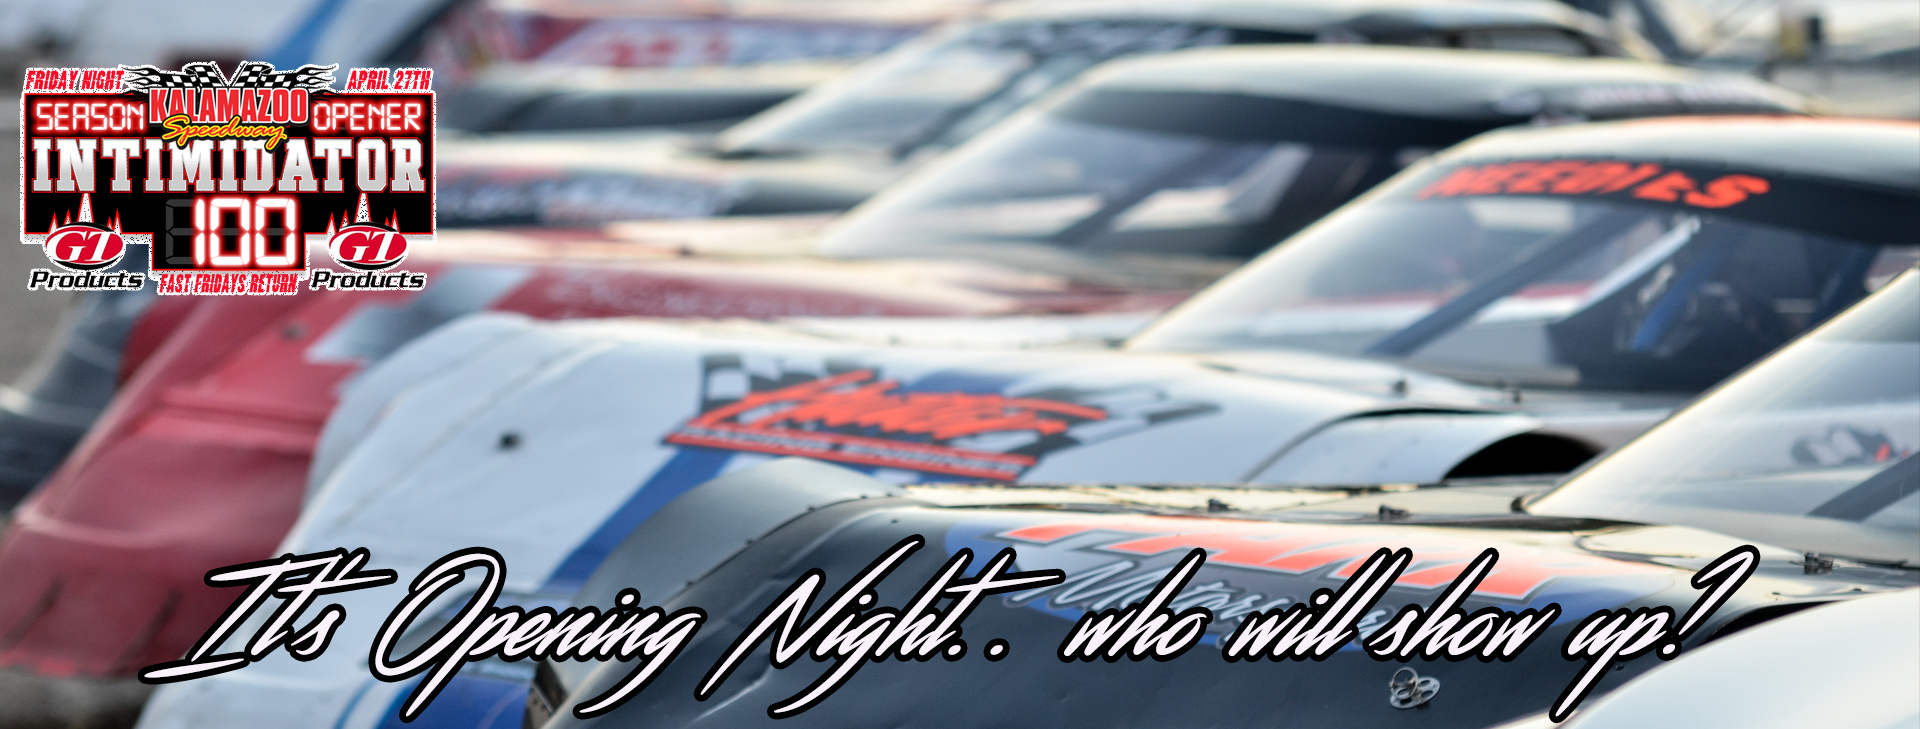 SEASON OPENER - STOCK FIVE NIGHT featuring the GT Products Intimidator 100 for the Outlaw Super Late Models - $2,500 to Win - $1,000 to Win Midwest Compacts & Outlaw FWD